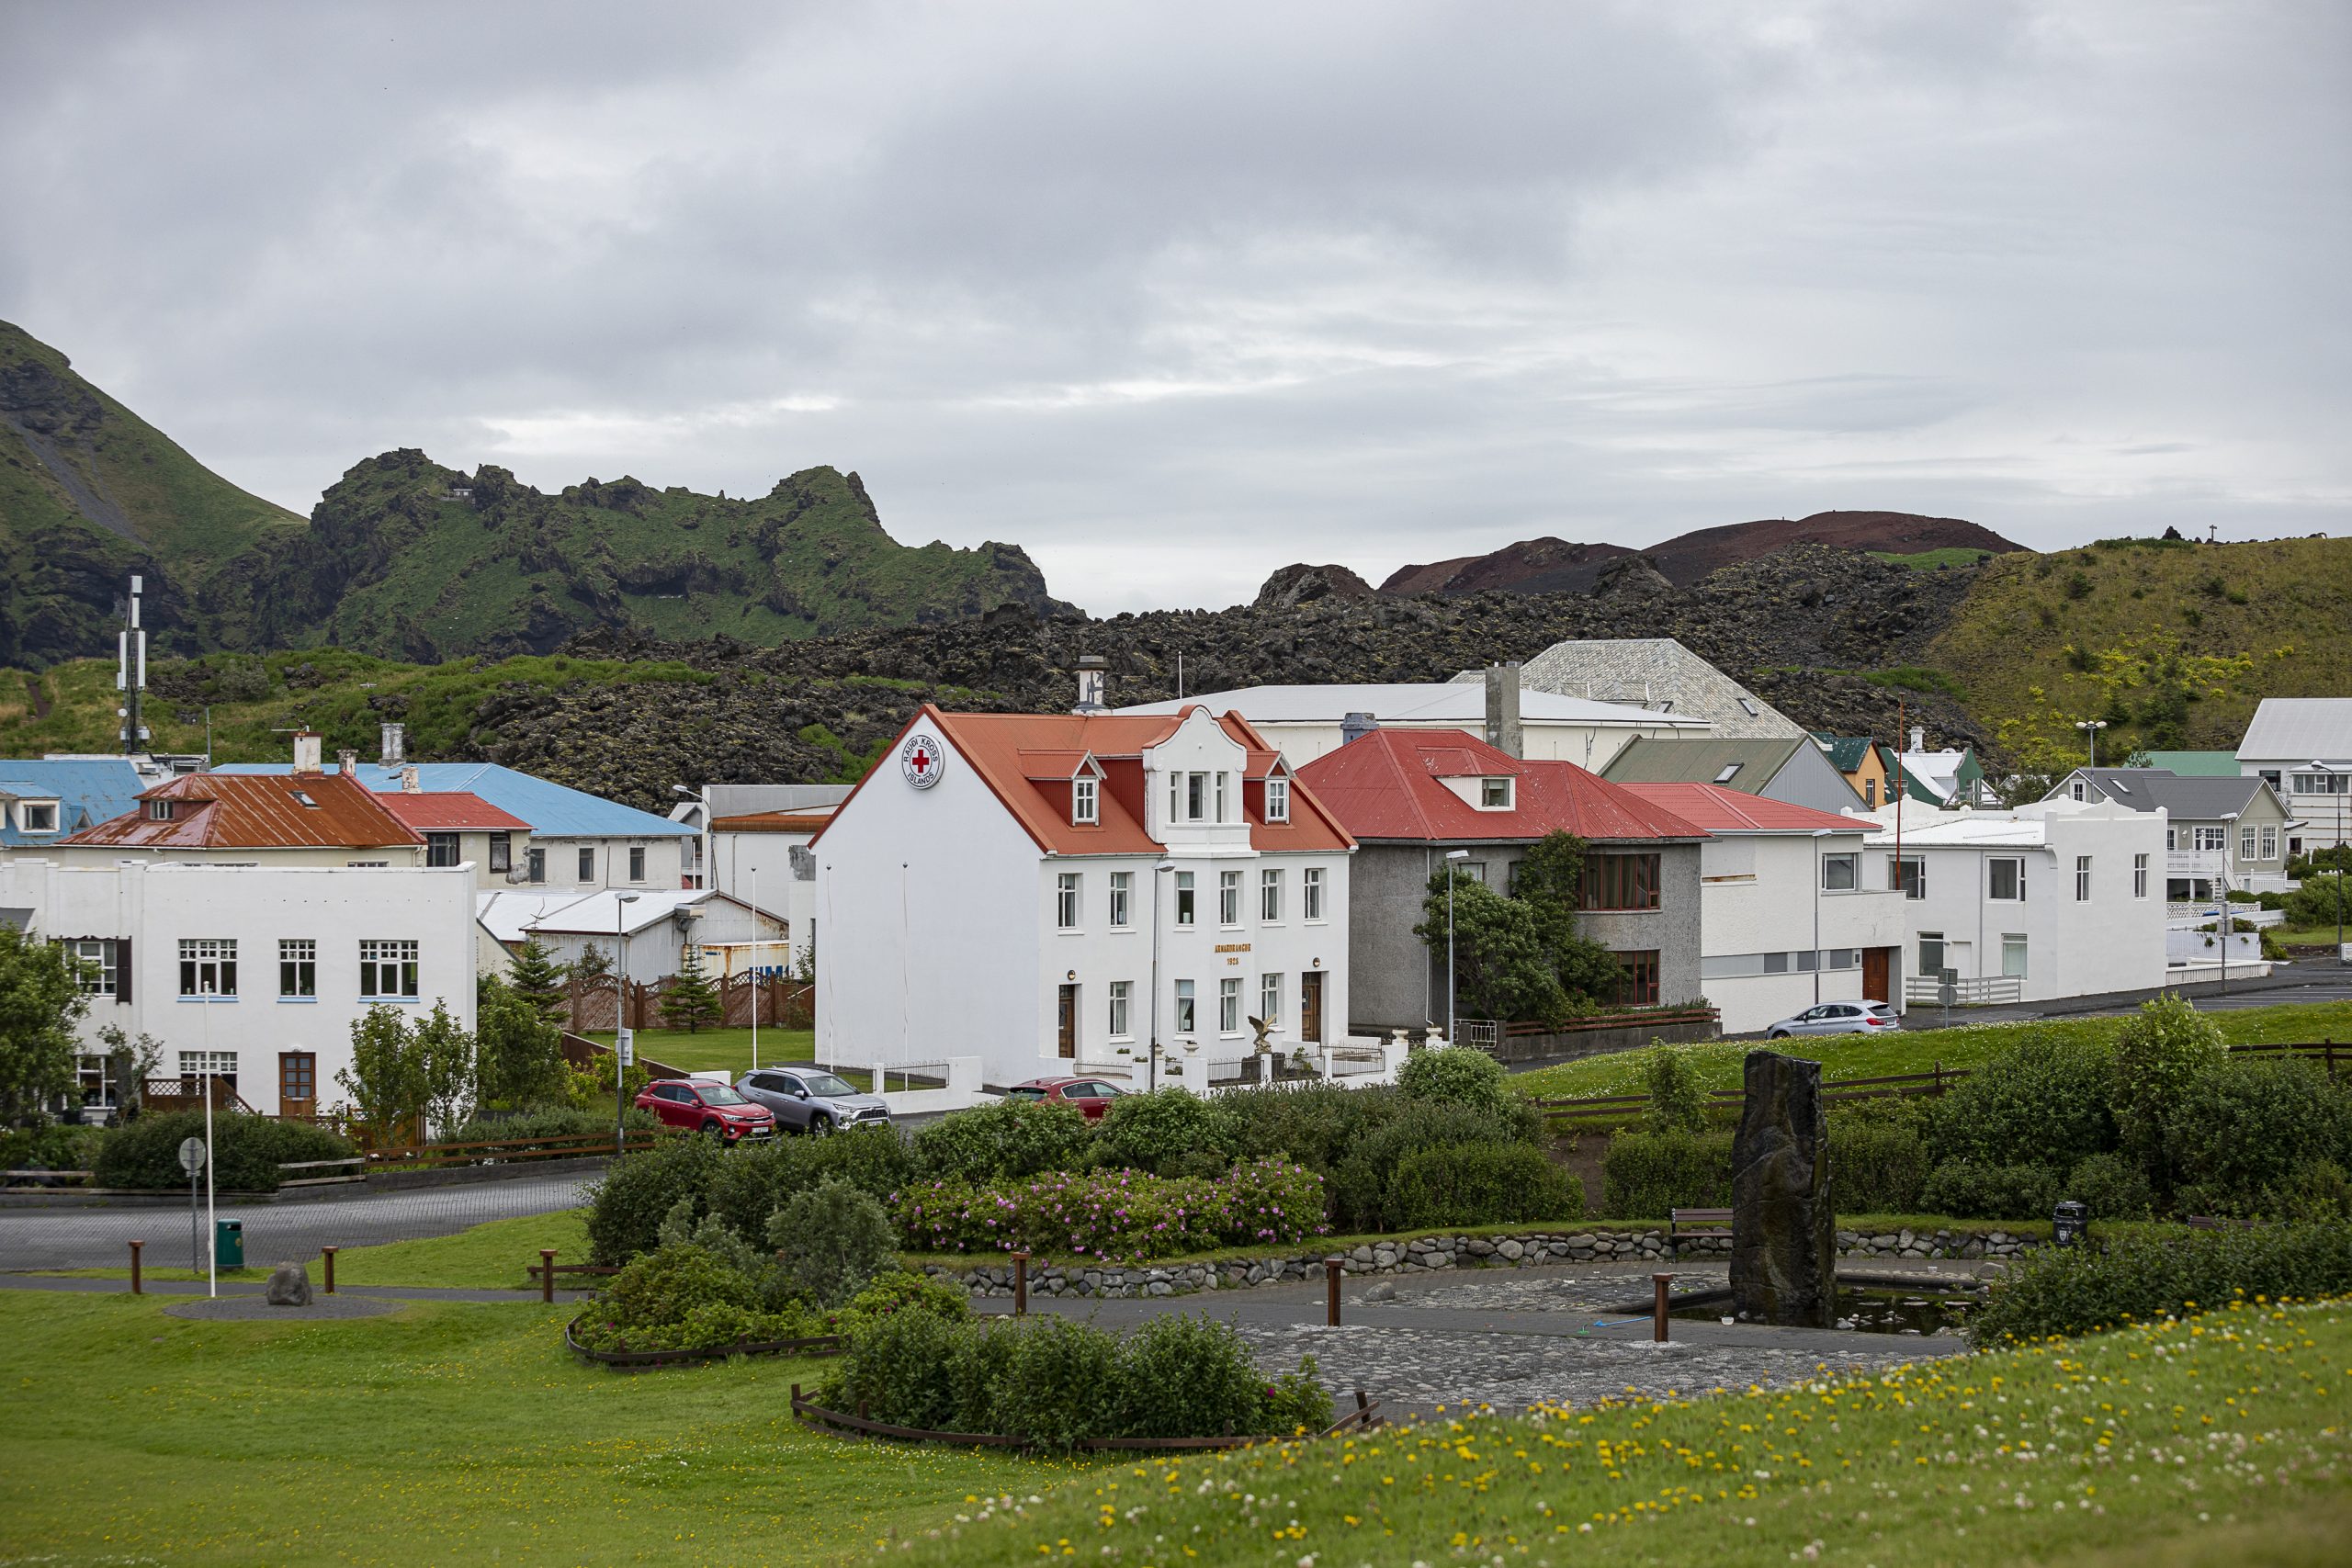 From Iceland – Icelandic Islanders are happier than those who live in Reykjavík